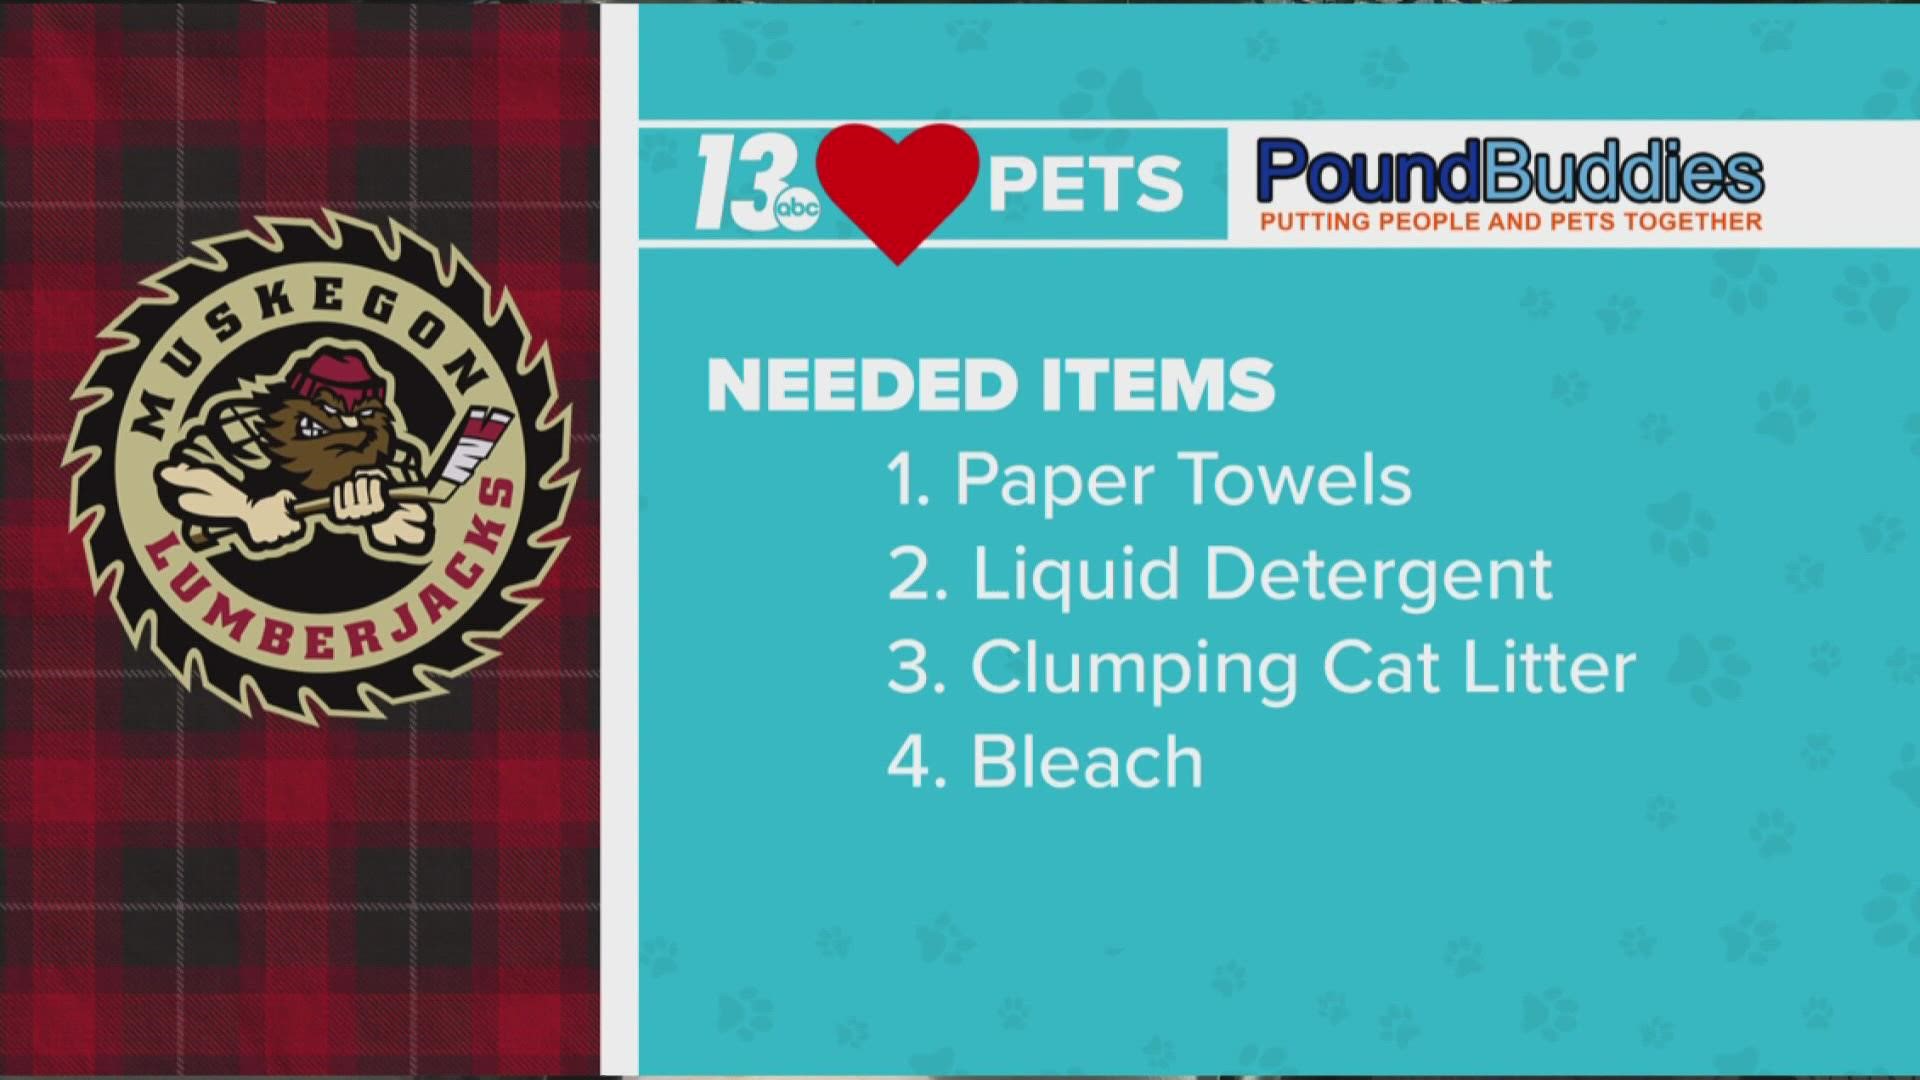 If you donate needed items to Pound Buddies at the Muskegon Lumberjacks game, you could win upgraded Jack's Club tickets to another game.